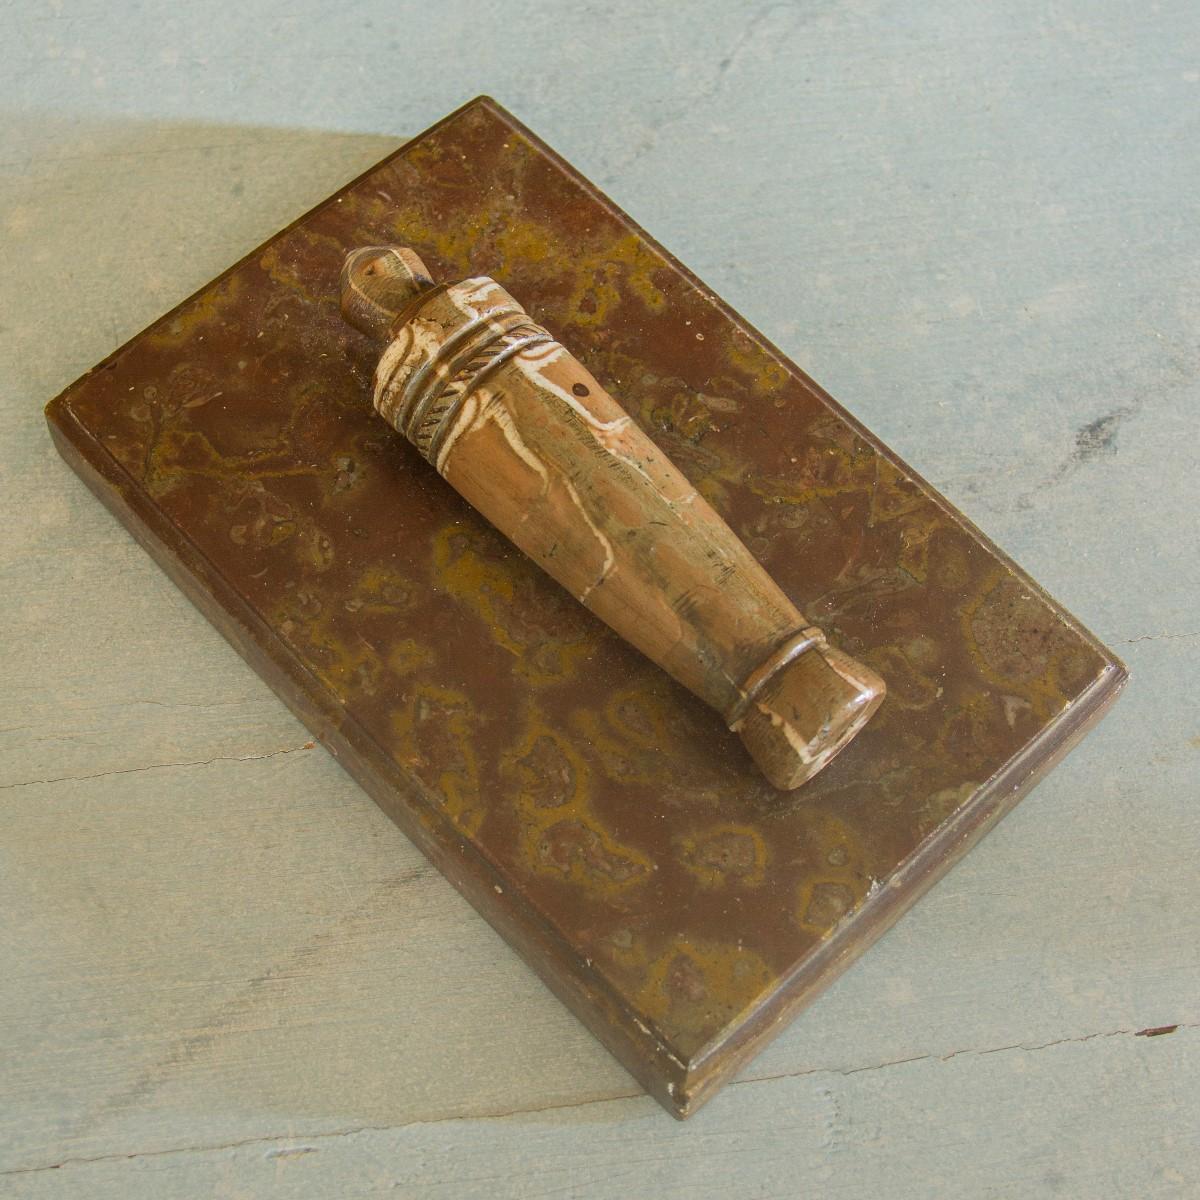 A Swedish marble leaf press or paperweight with a cannon handle, circa 1850.

This would make a great desk accessory.